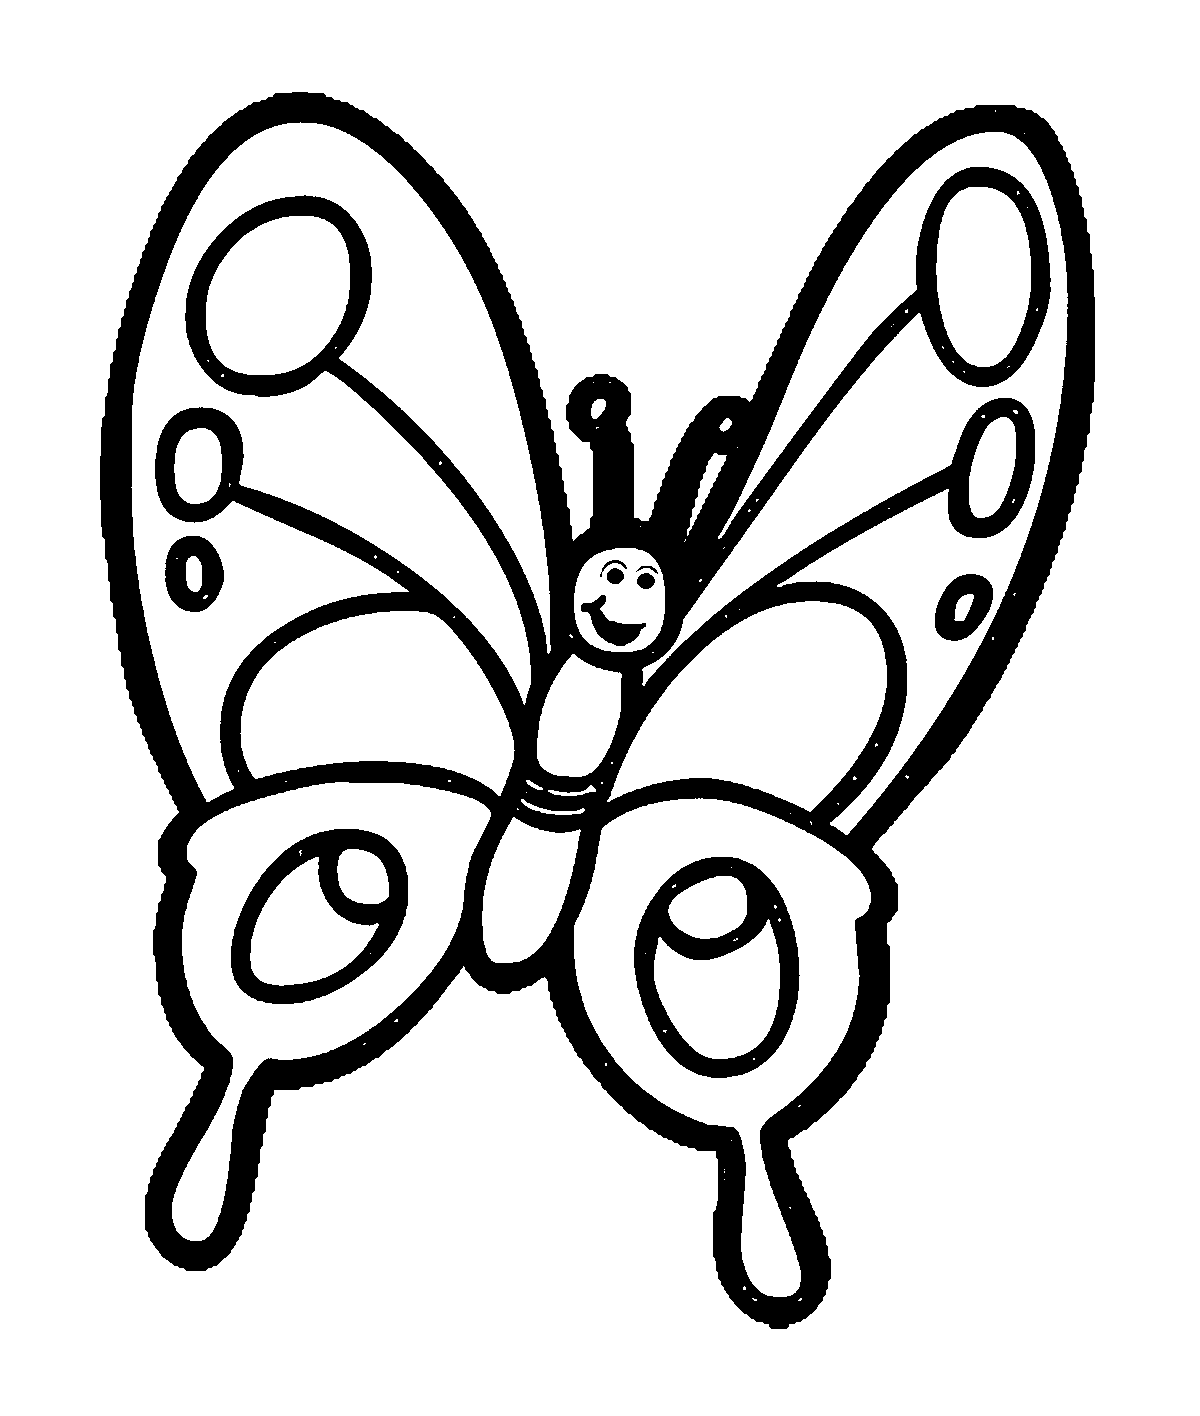 Butterfly  black and white cartoonbutterfly coloring page format wecoloringpage butterfly clip art